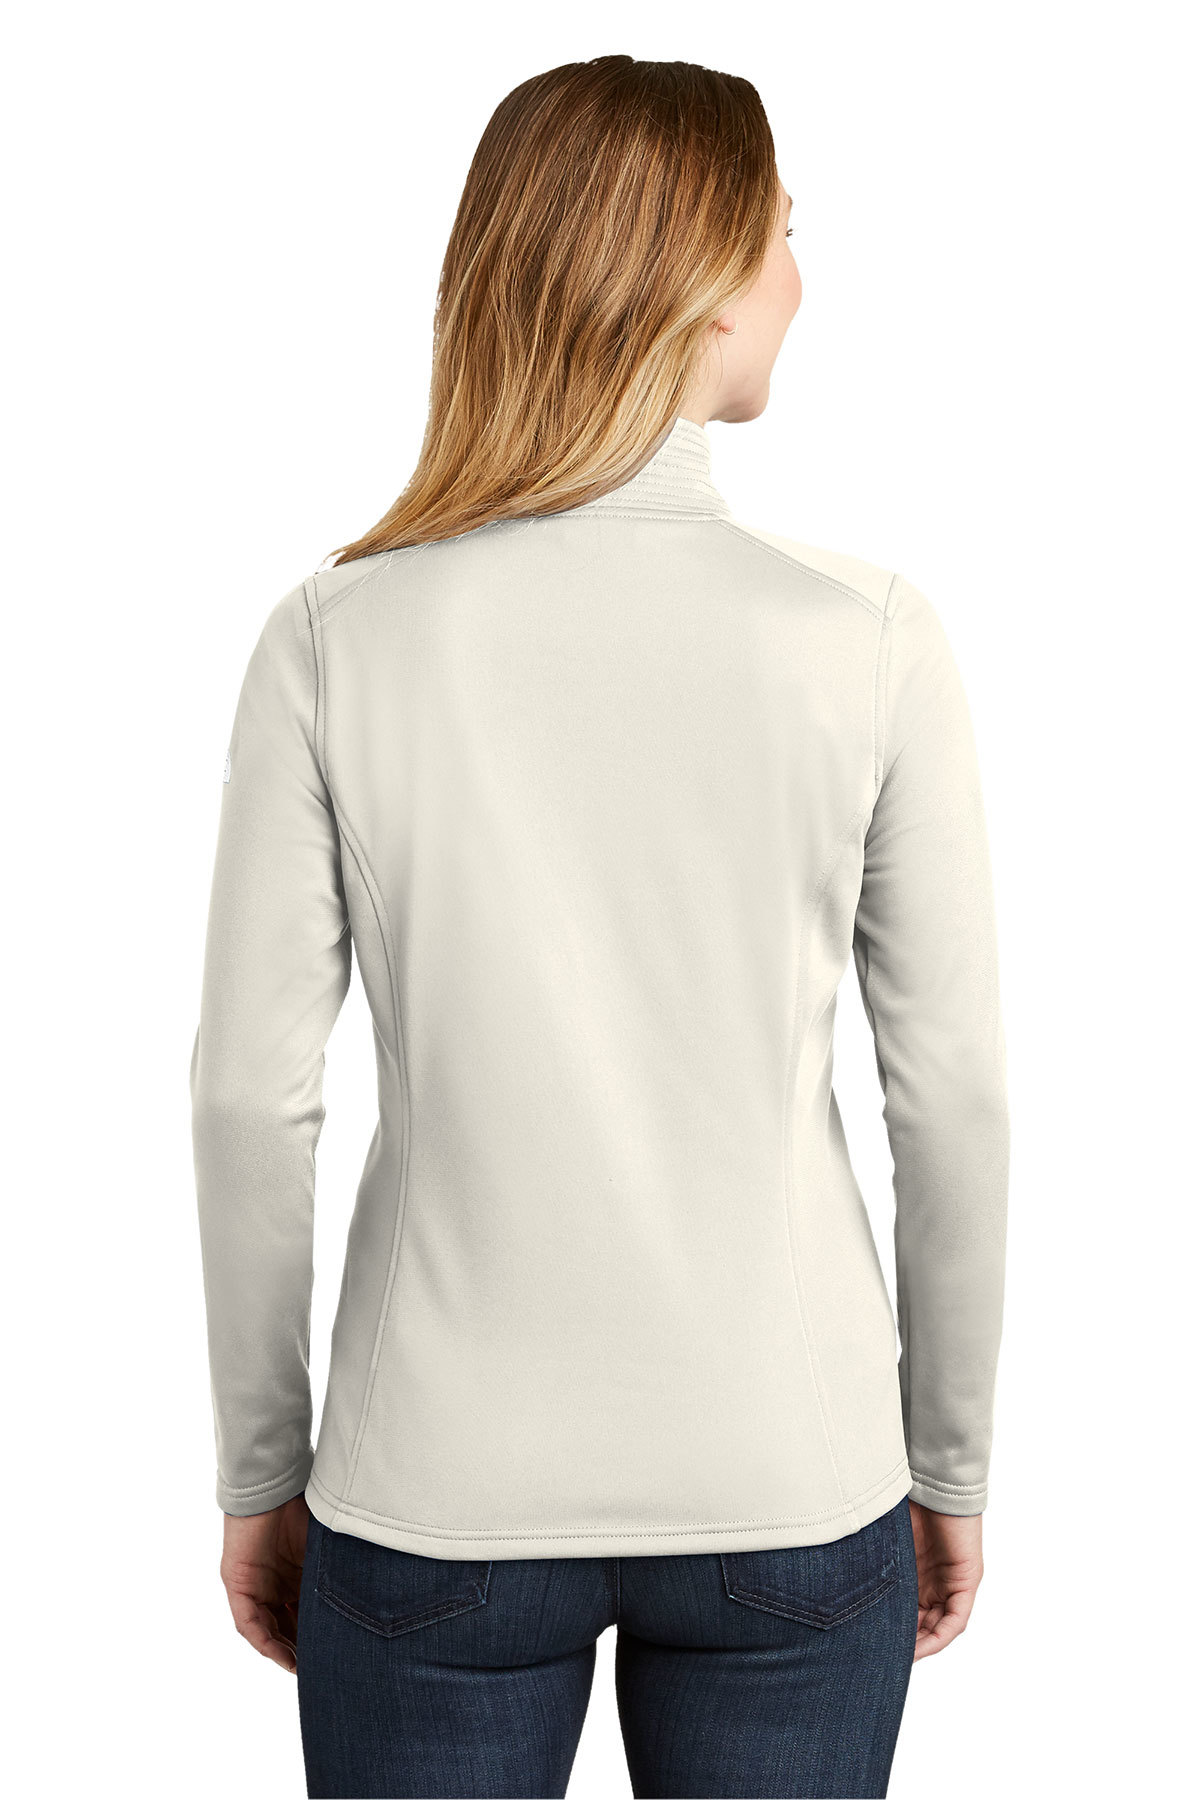 The North Face ® Ladies Tech 1/4-Zip Fleece | Product | Company Casuals